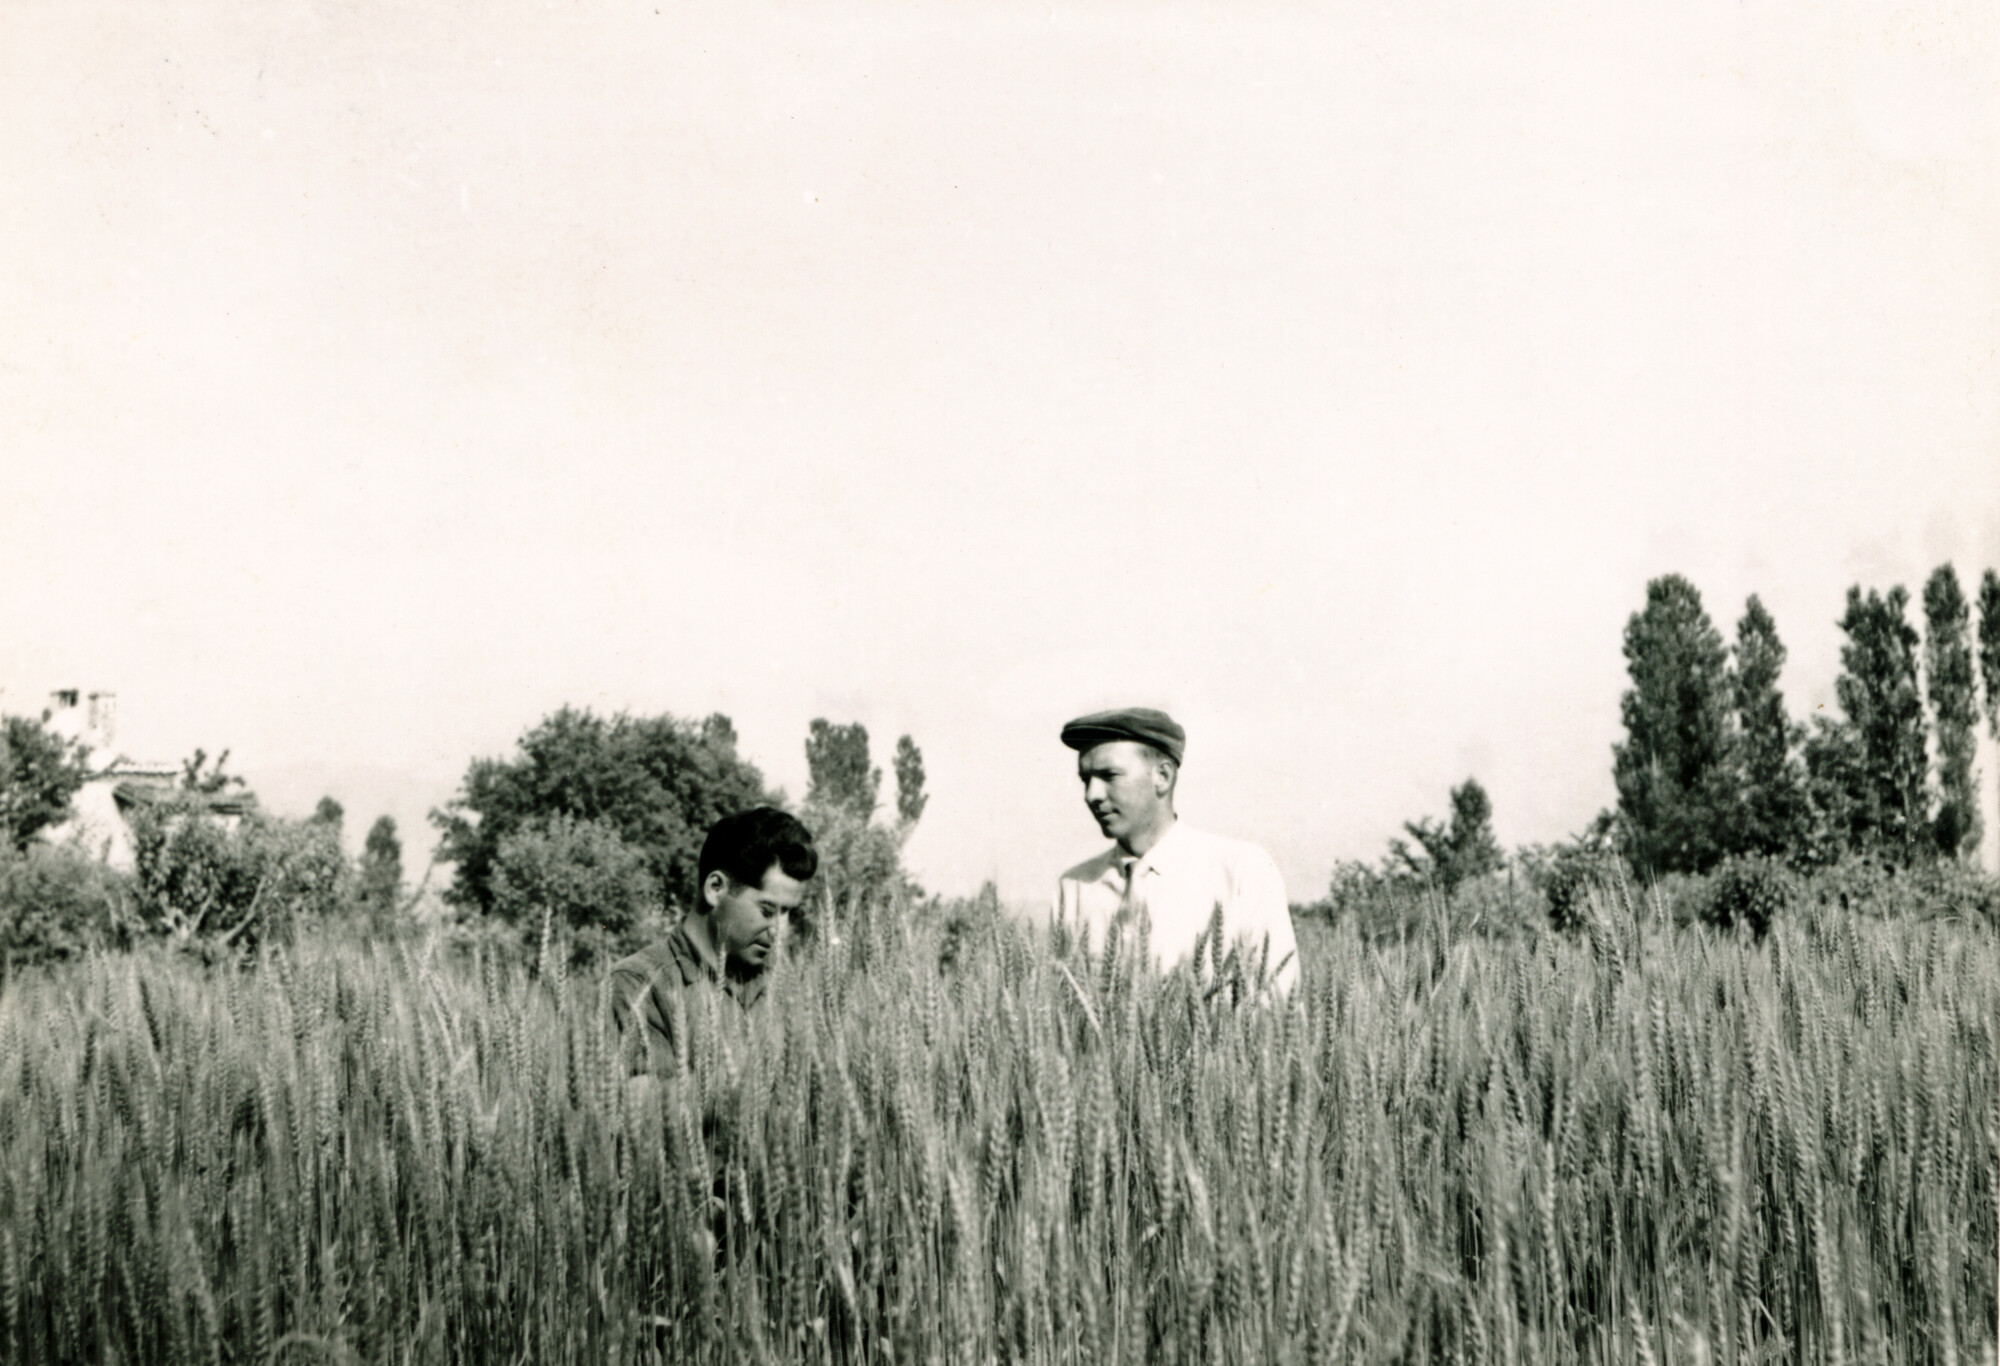 Omar Lapp and Dwight Moody Wiebe stand in a field of wheat at a field project experimant for fertilized wheat in Tsakones, Greece in 1959.